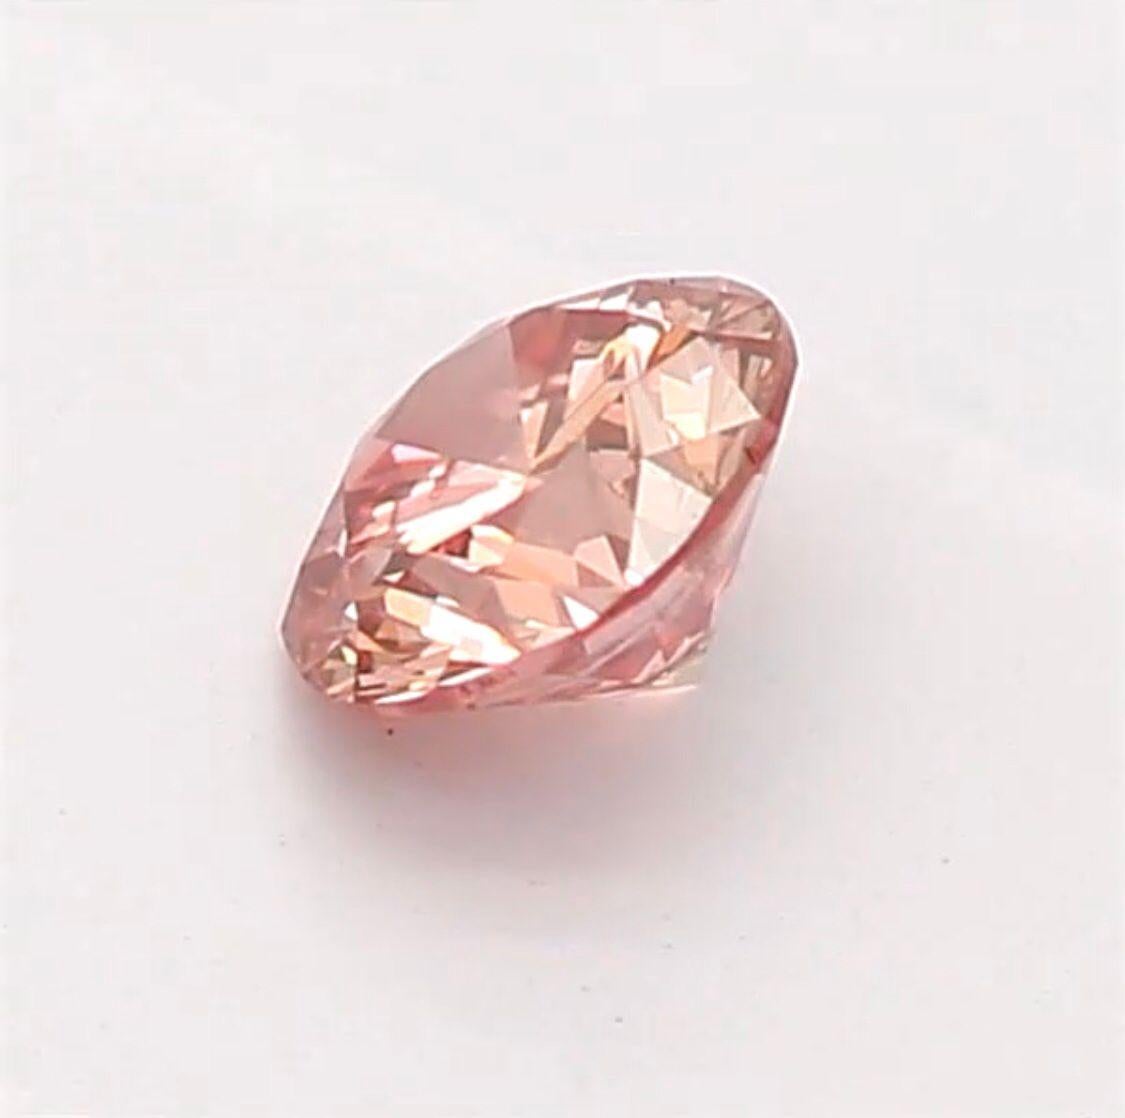 0.15 Carat Fancy Orangy Pink Round Shaped Diamond SI2 Clarity CGL Certified For Sale 3